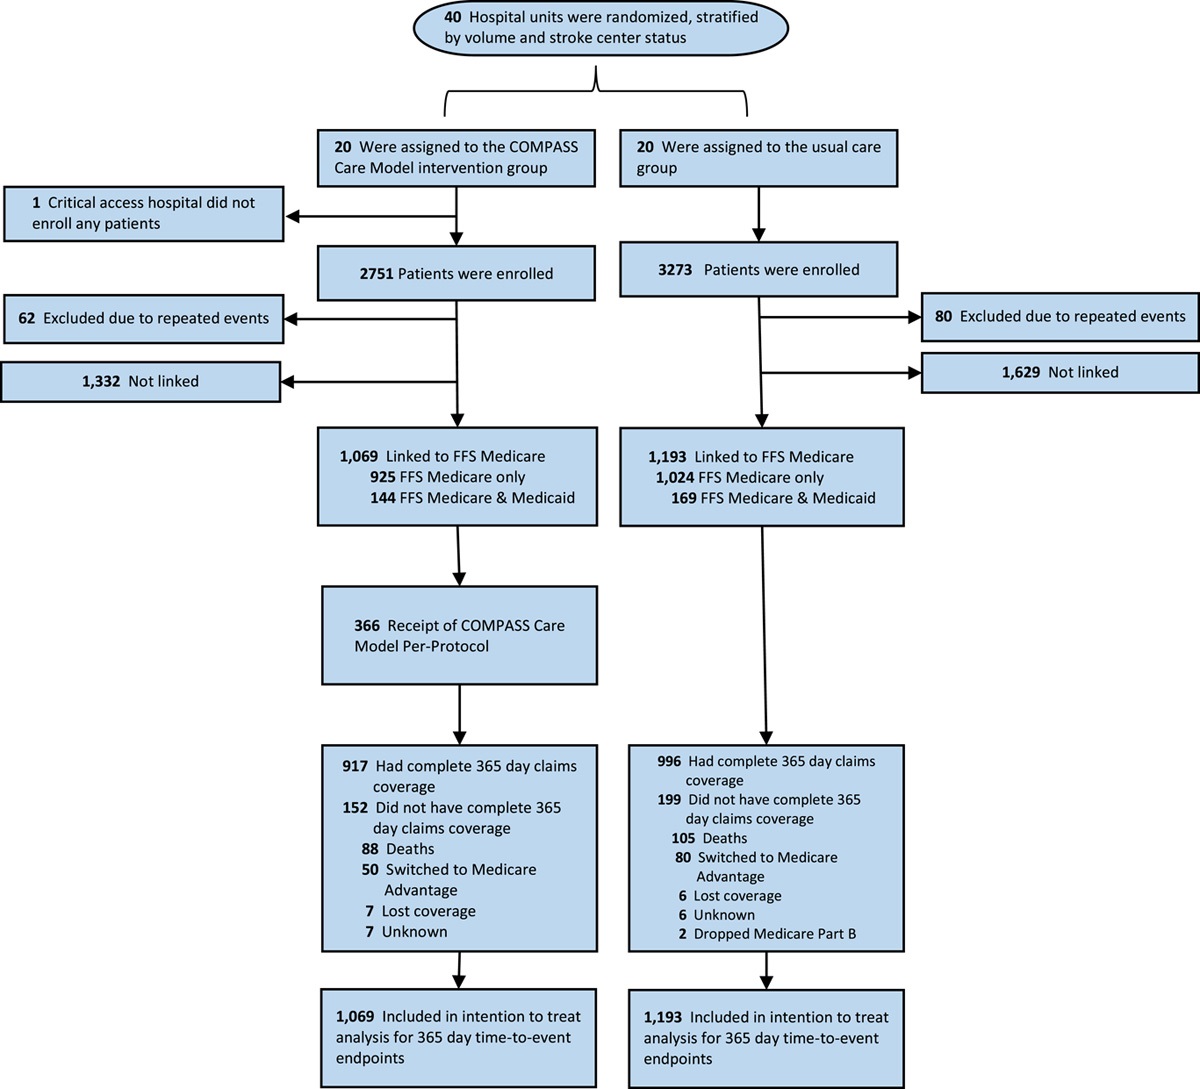 Post-acute Ambulatory Care Service Use Among Patients Discharged Home After Stroke or TIA: The Cluster-randomized COMPASS Study